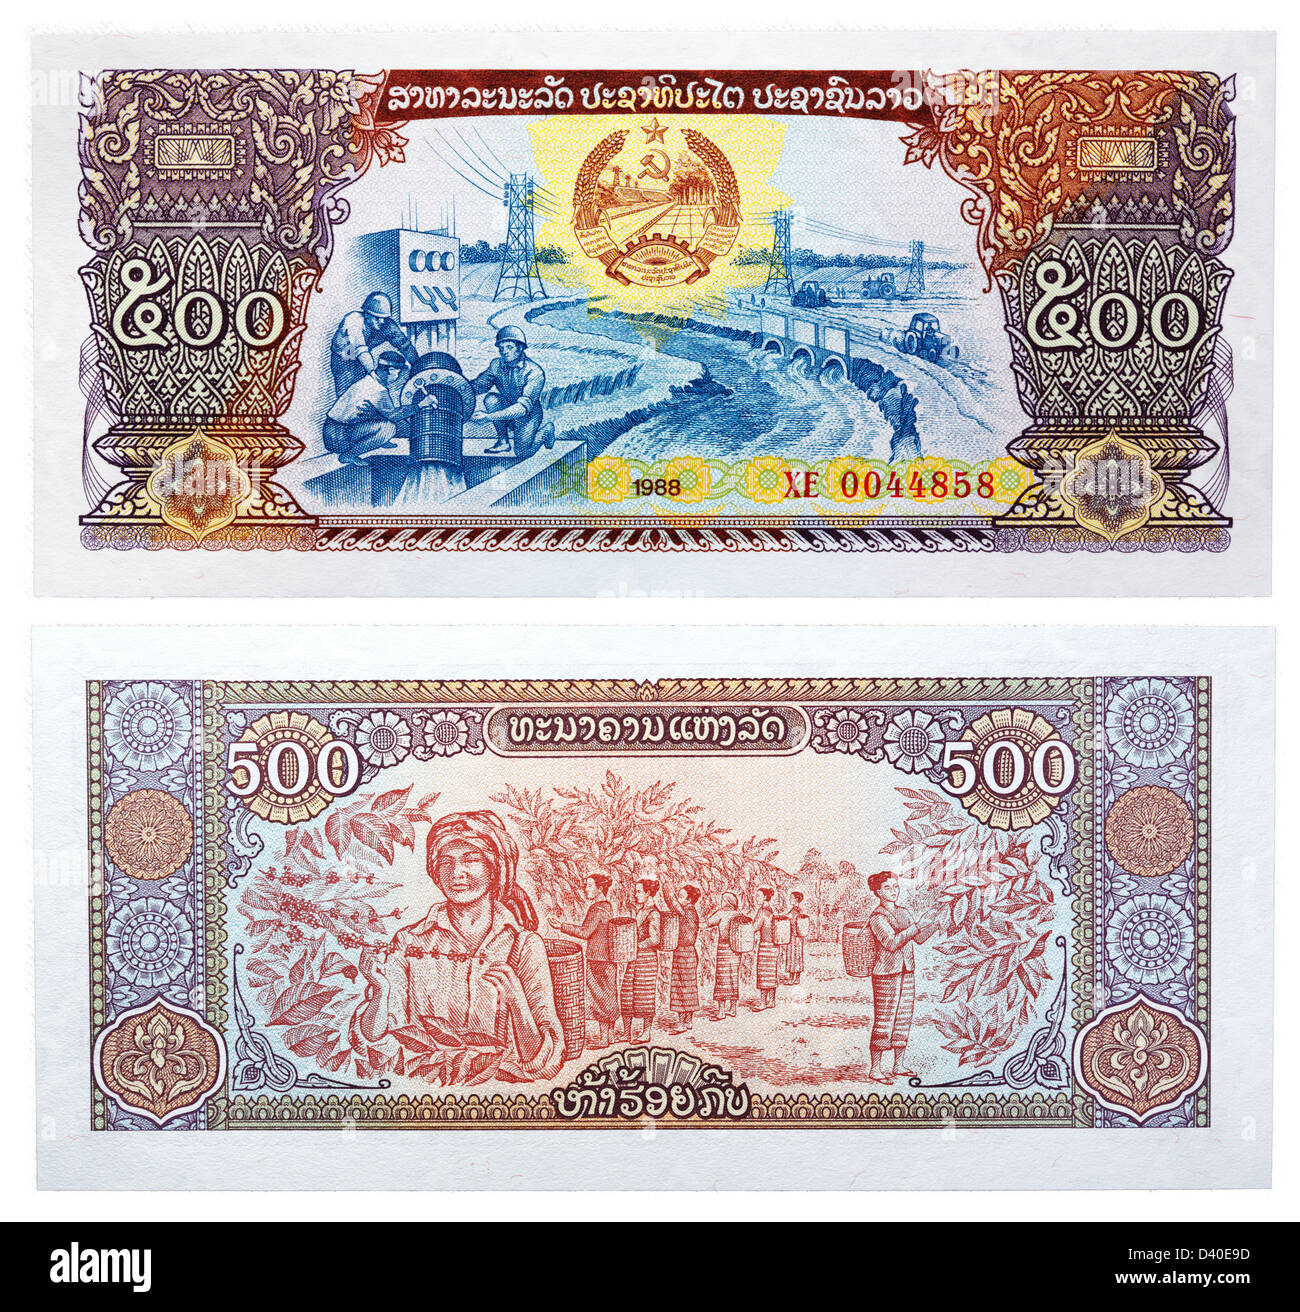 500 Kip banknote, Irrigation systems and harvesting fruit, Laos, 1988 Stock Photo